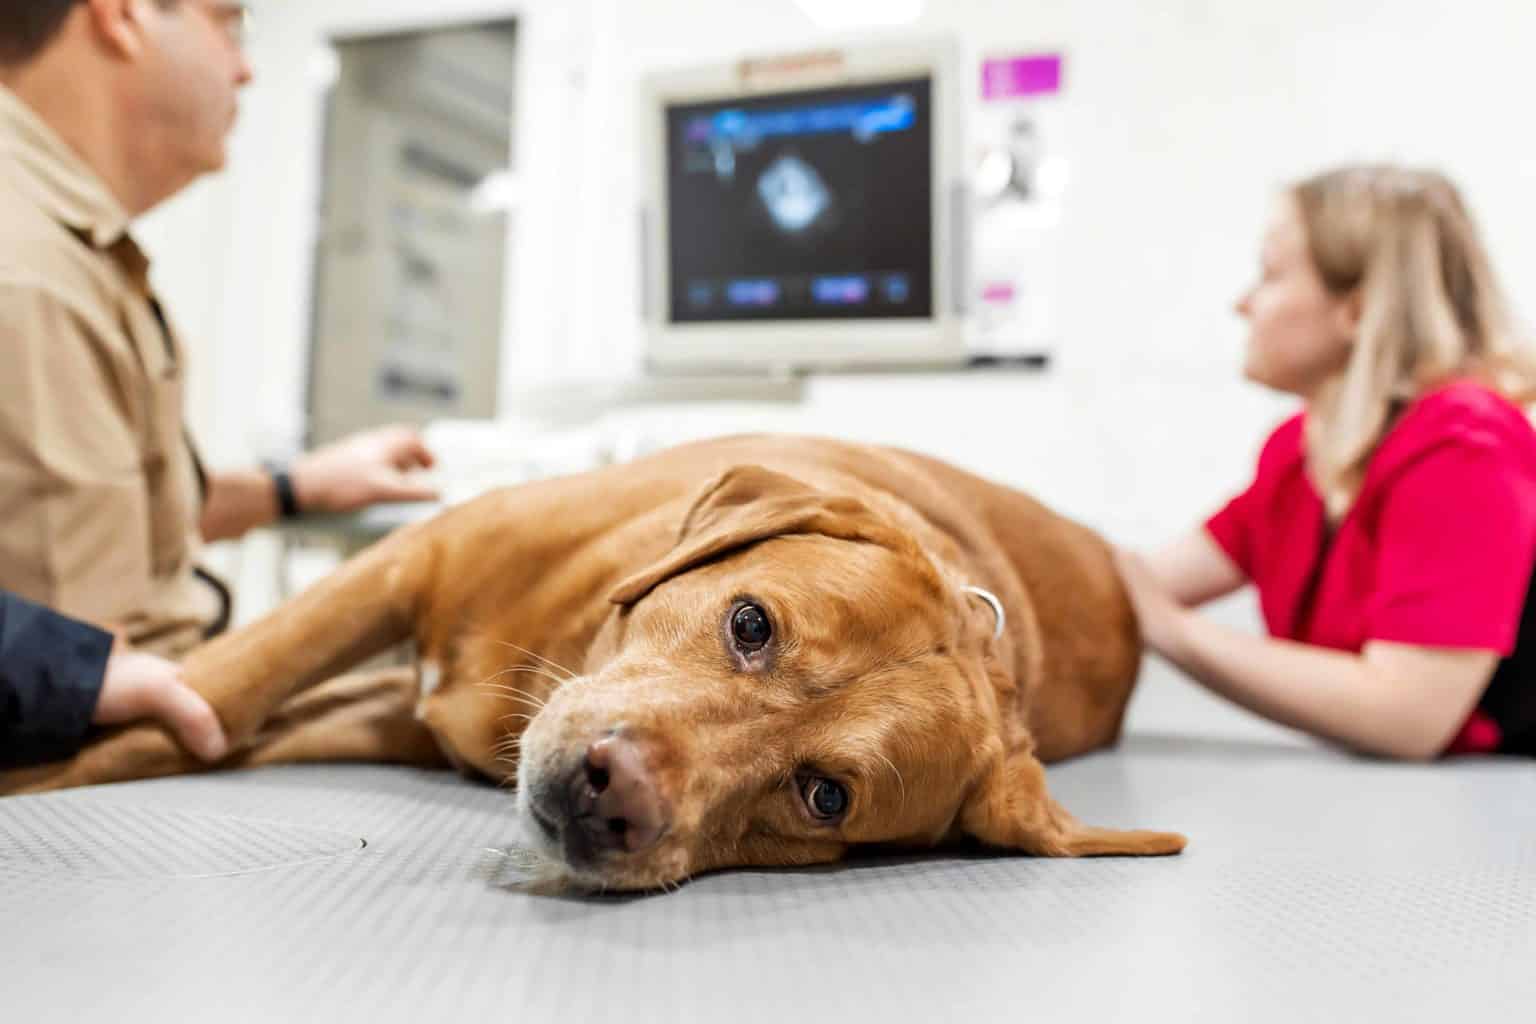 Sick dog getting tests at vet's office. Comprehensive pet health insurance policies cover accidents and illnesses and routine care like vaccinations and annual check-ups.